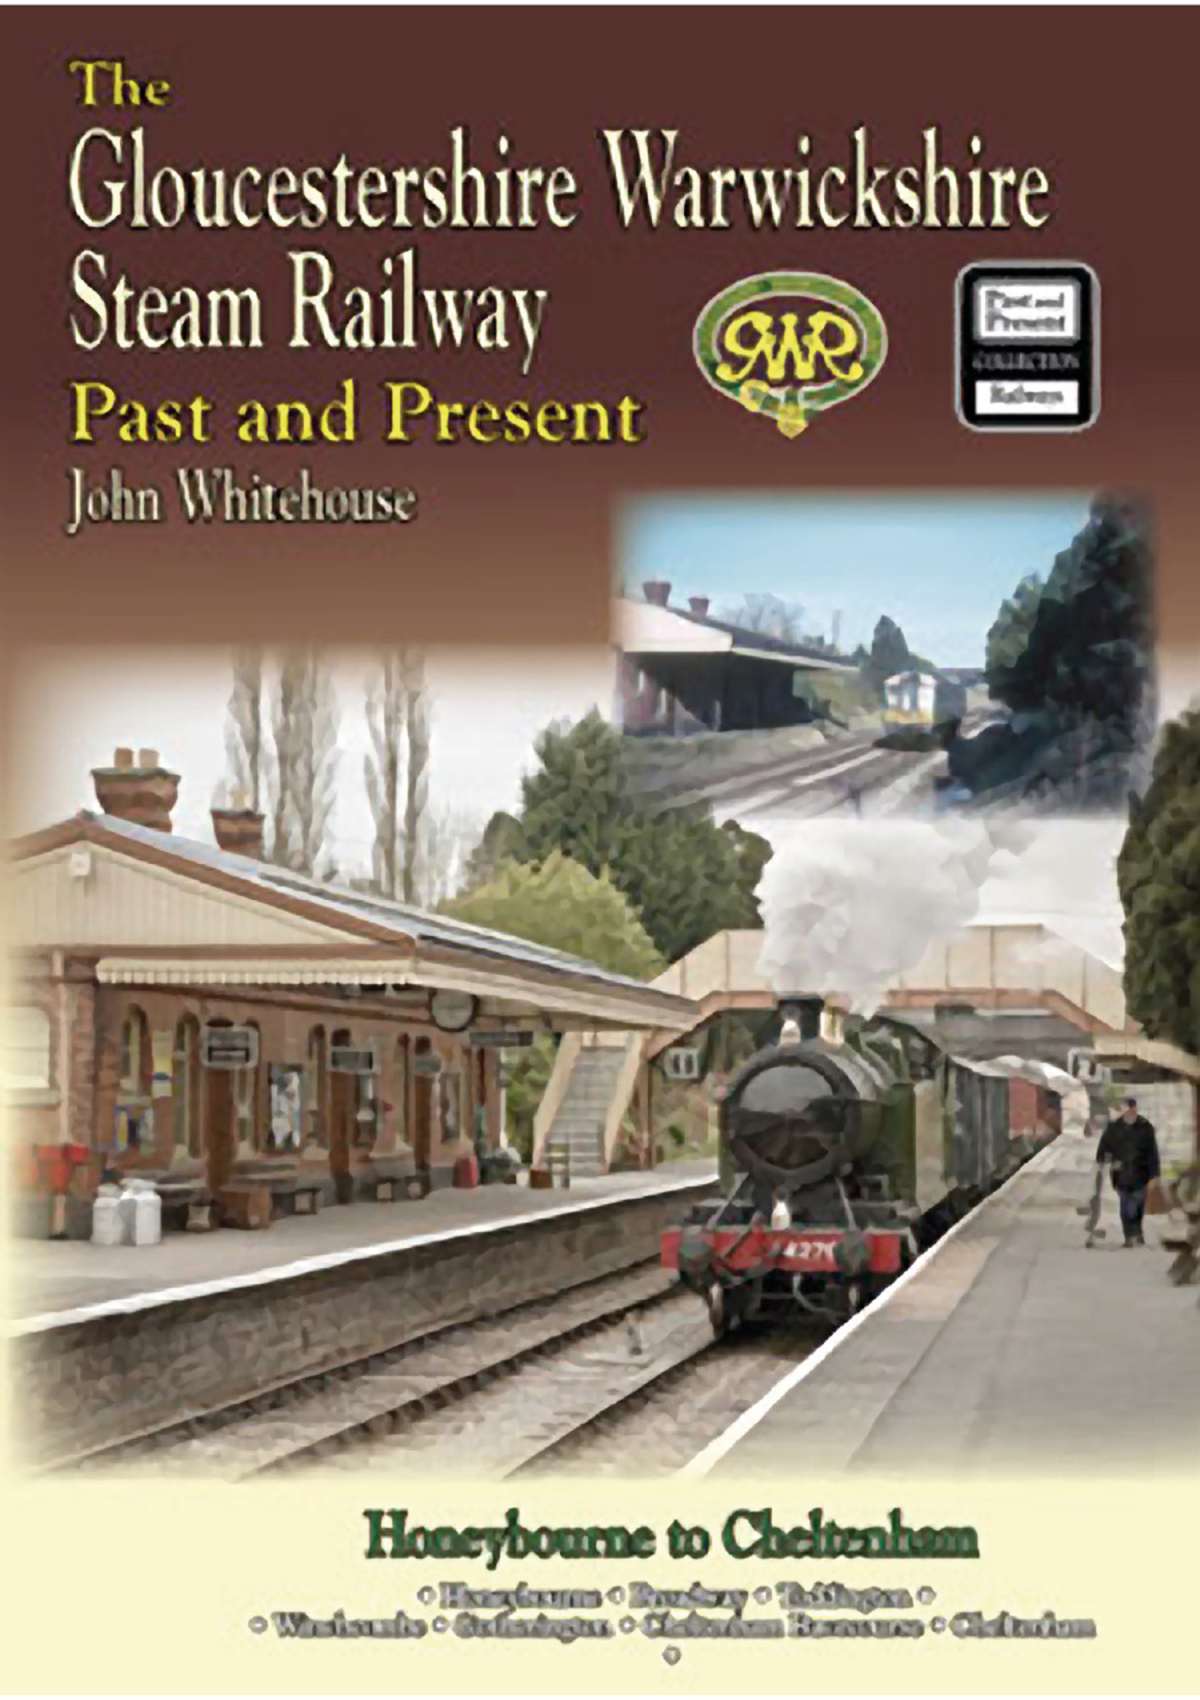 2925 - The Gloucestershire Warwickshire Steam Railway Past and Present